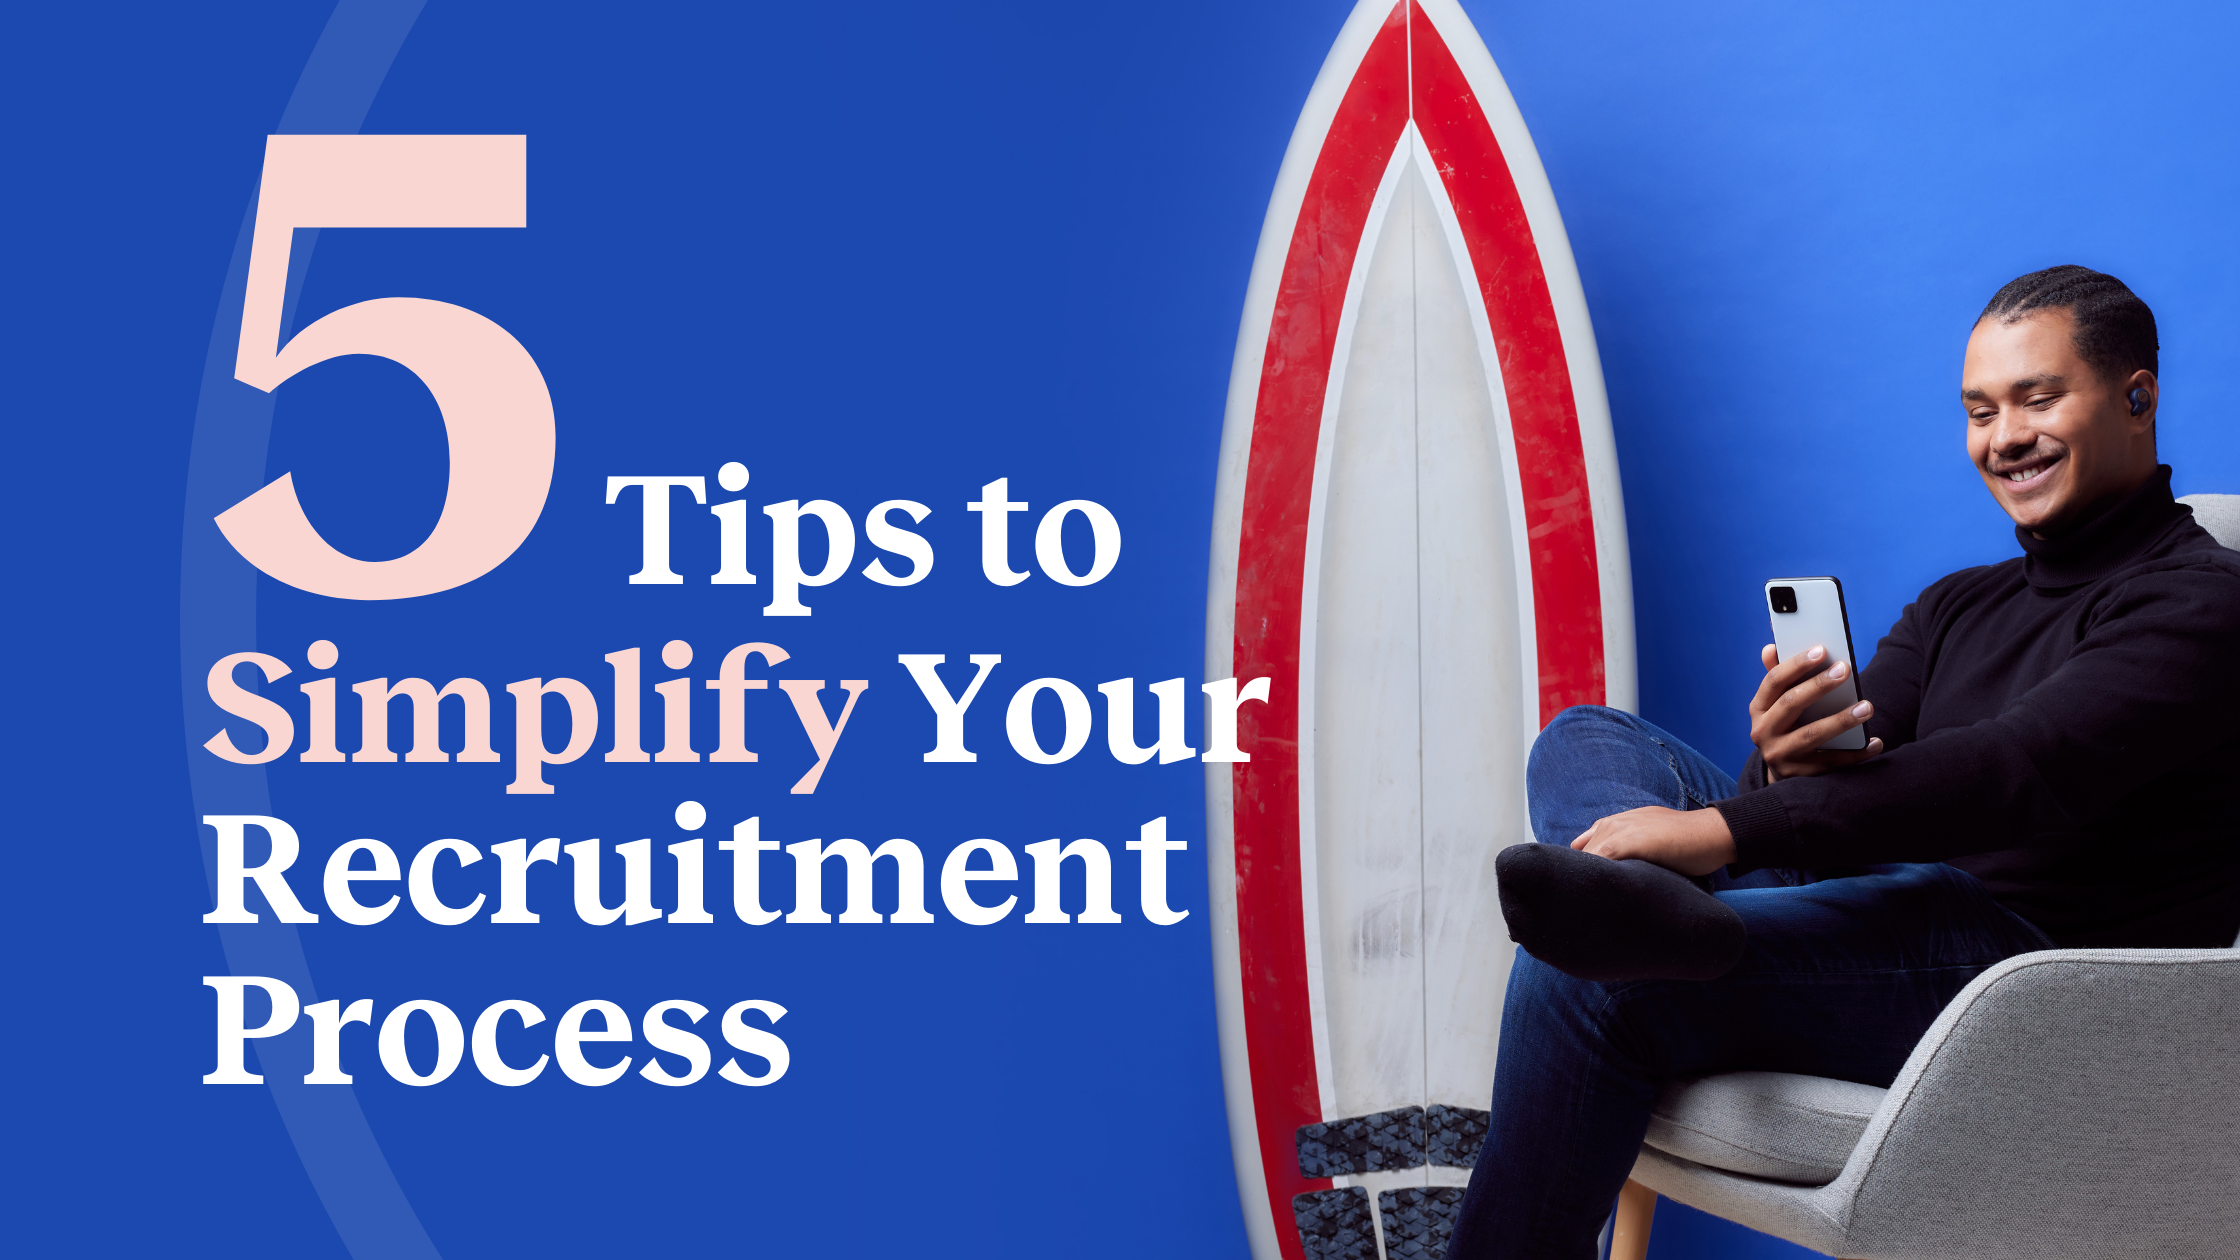 5 Tips to Simplify Your Recruitment Process